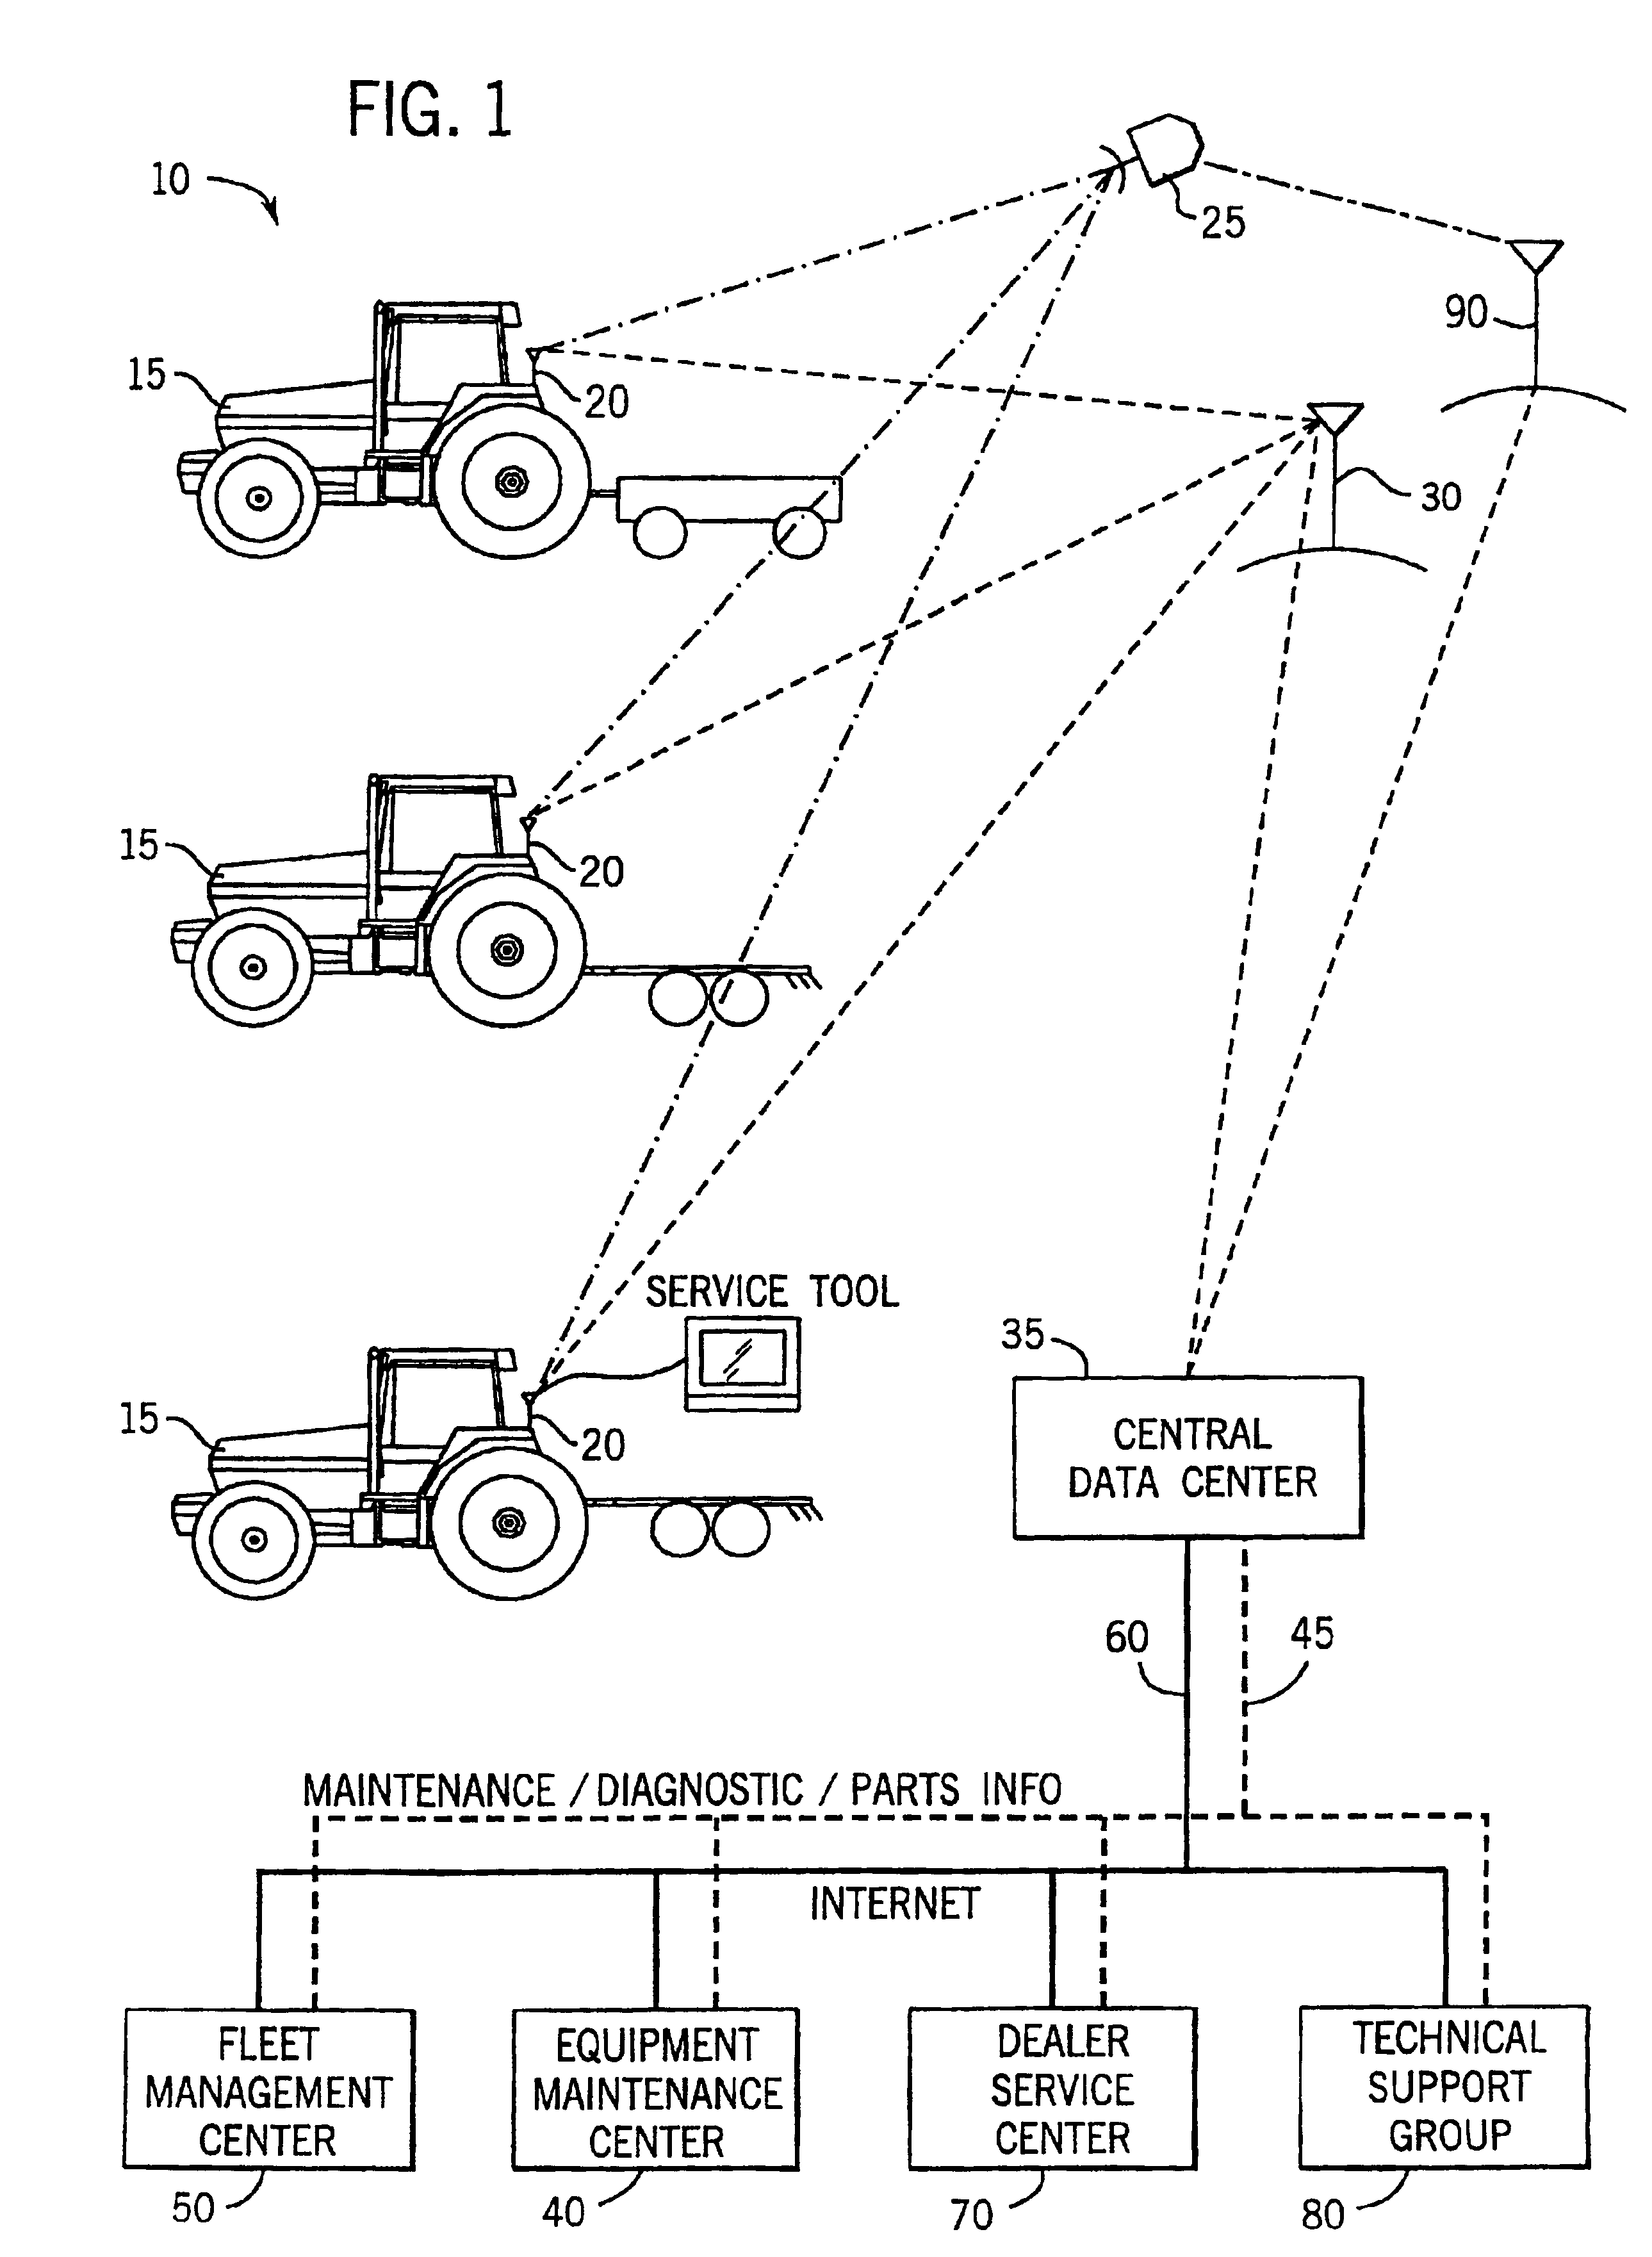 Method and apparatus for monitoring work vehicles